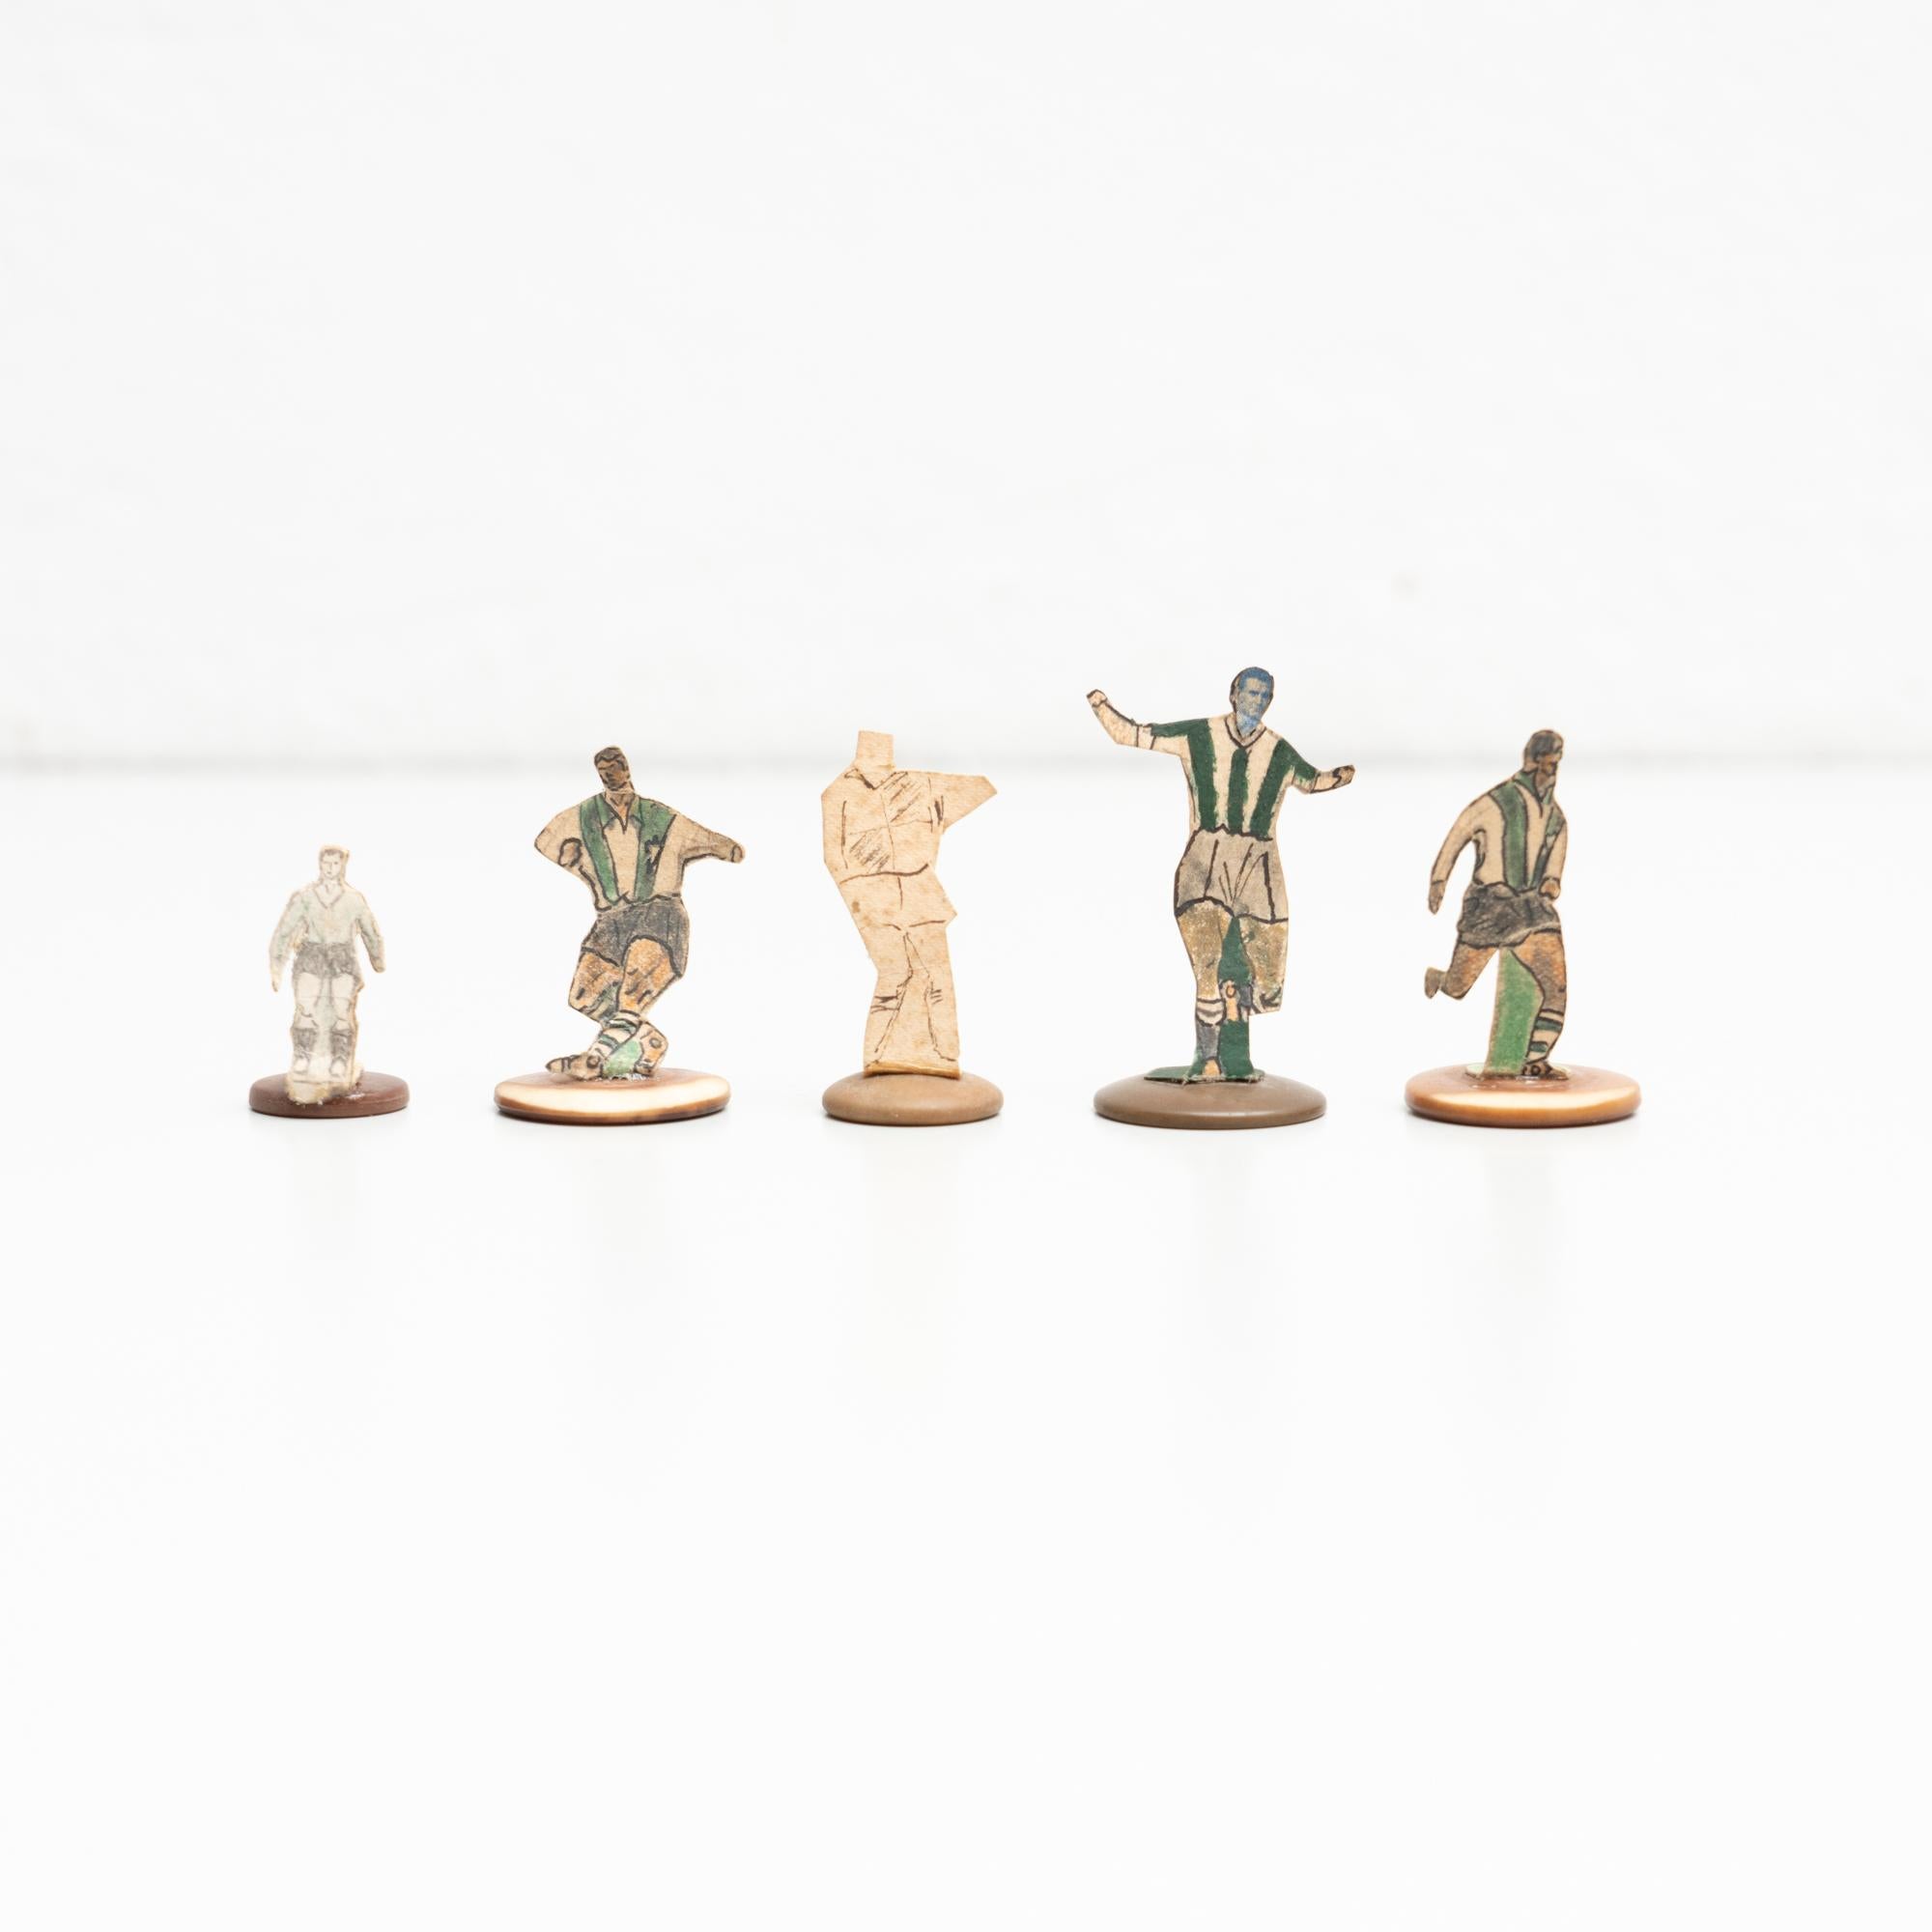 Set of five table button soccer game players. Traditional figures used to play this classic button Spanish game. 

The players are build buy attaching a printed photography or drawing of an actual football soccer player to a clothing button.